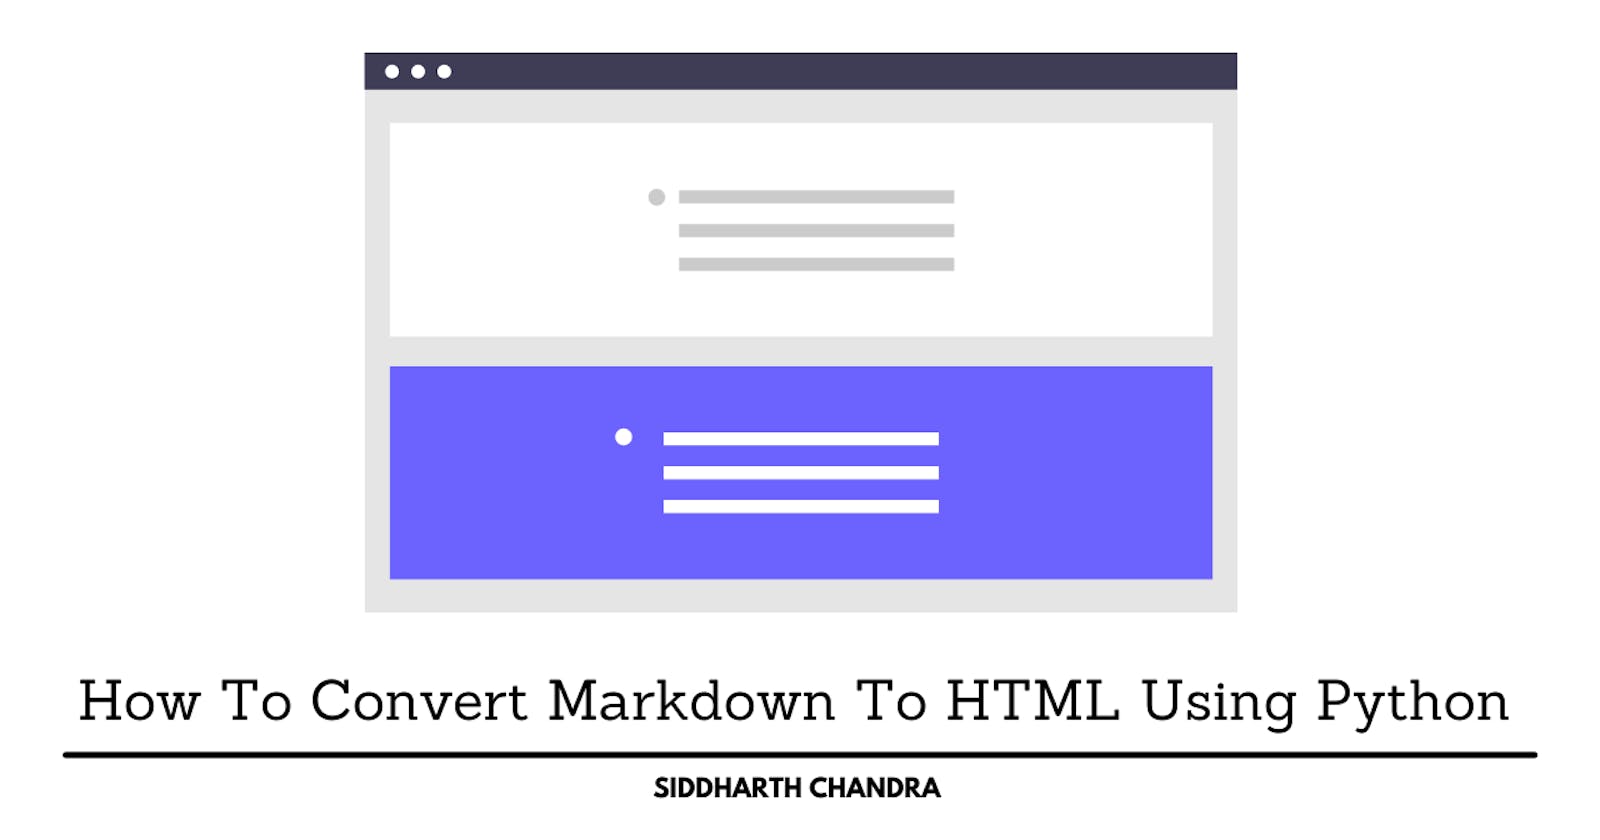 How To Convert Markdown To HTML Using Python